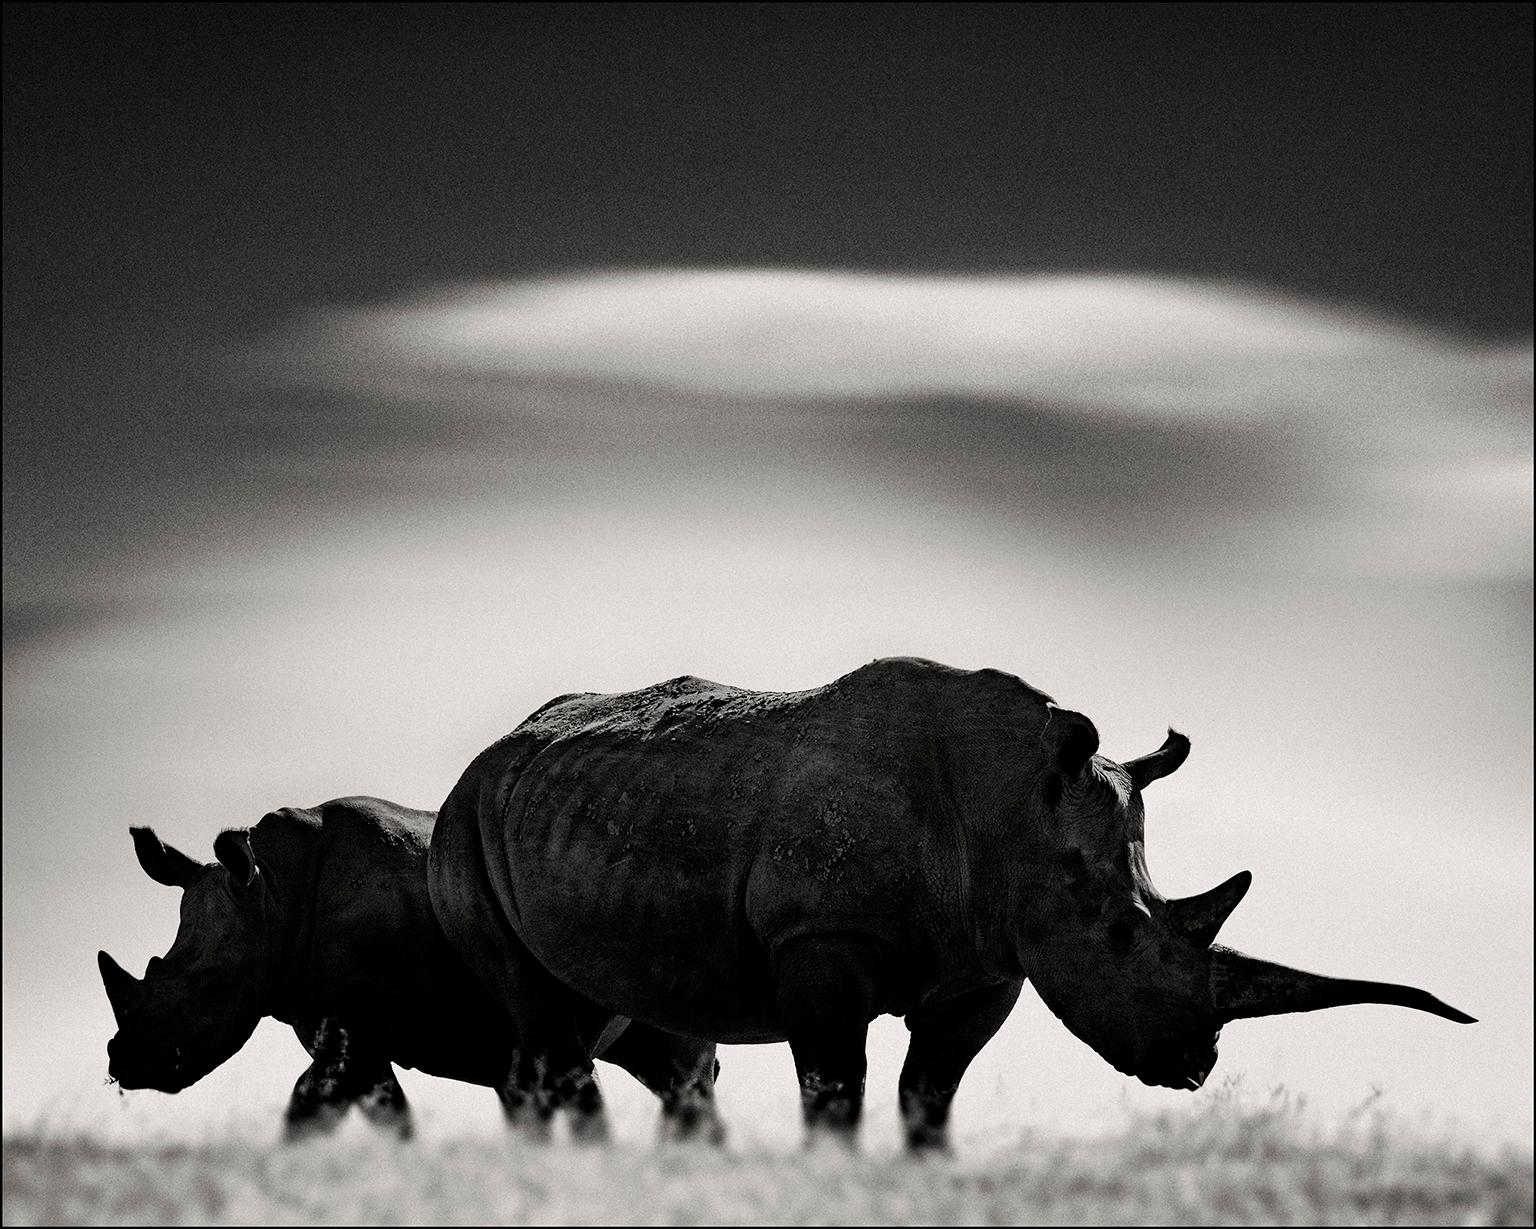 Joachim Schmeisser Black and White Photograph - Rhino couple in front of Mount Kenya, animal, black and white photography